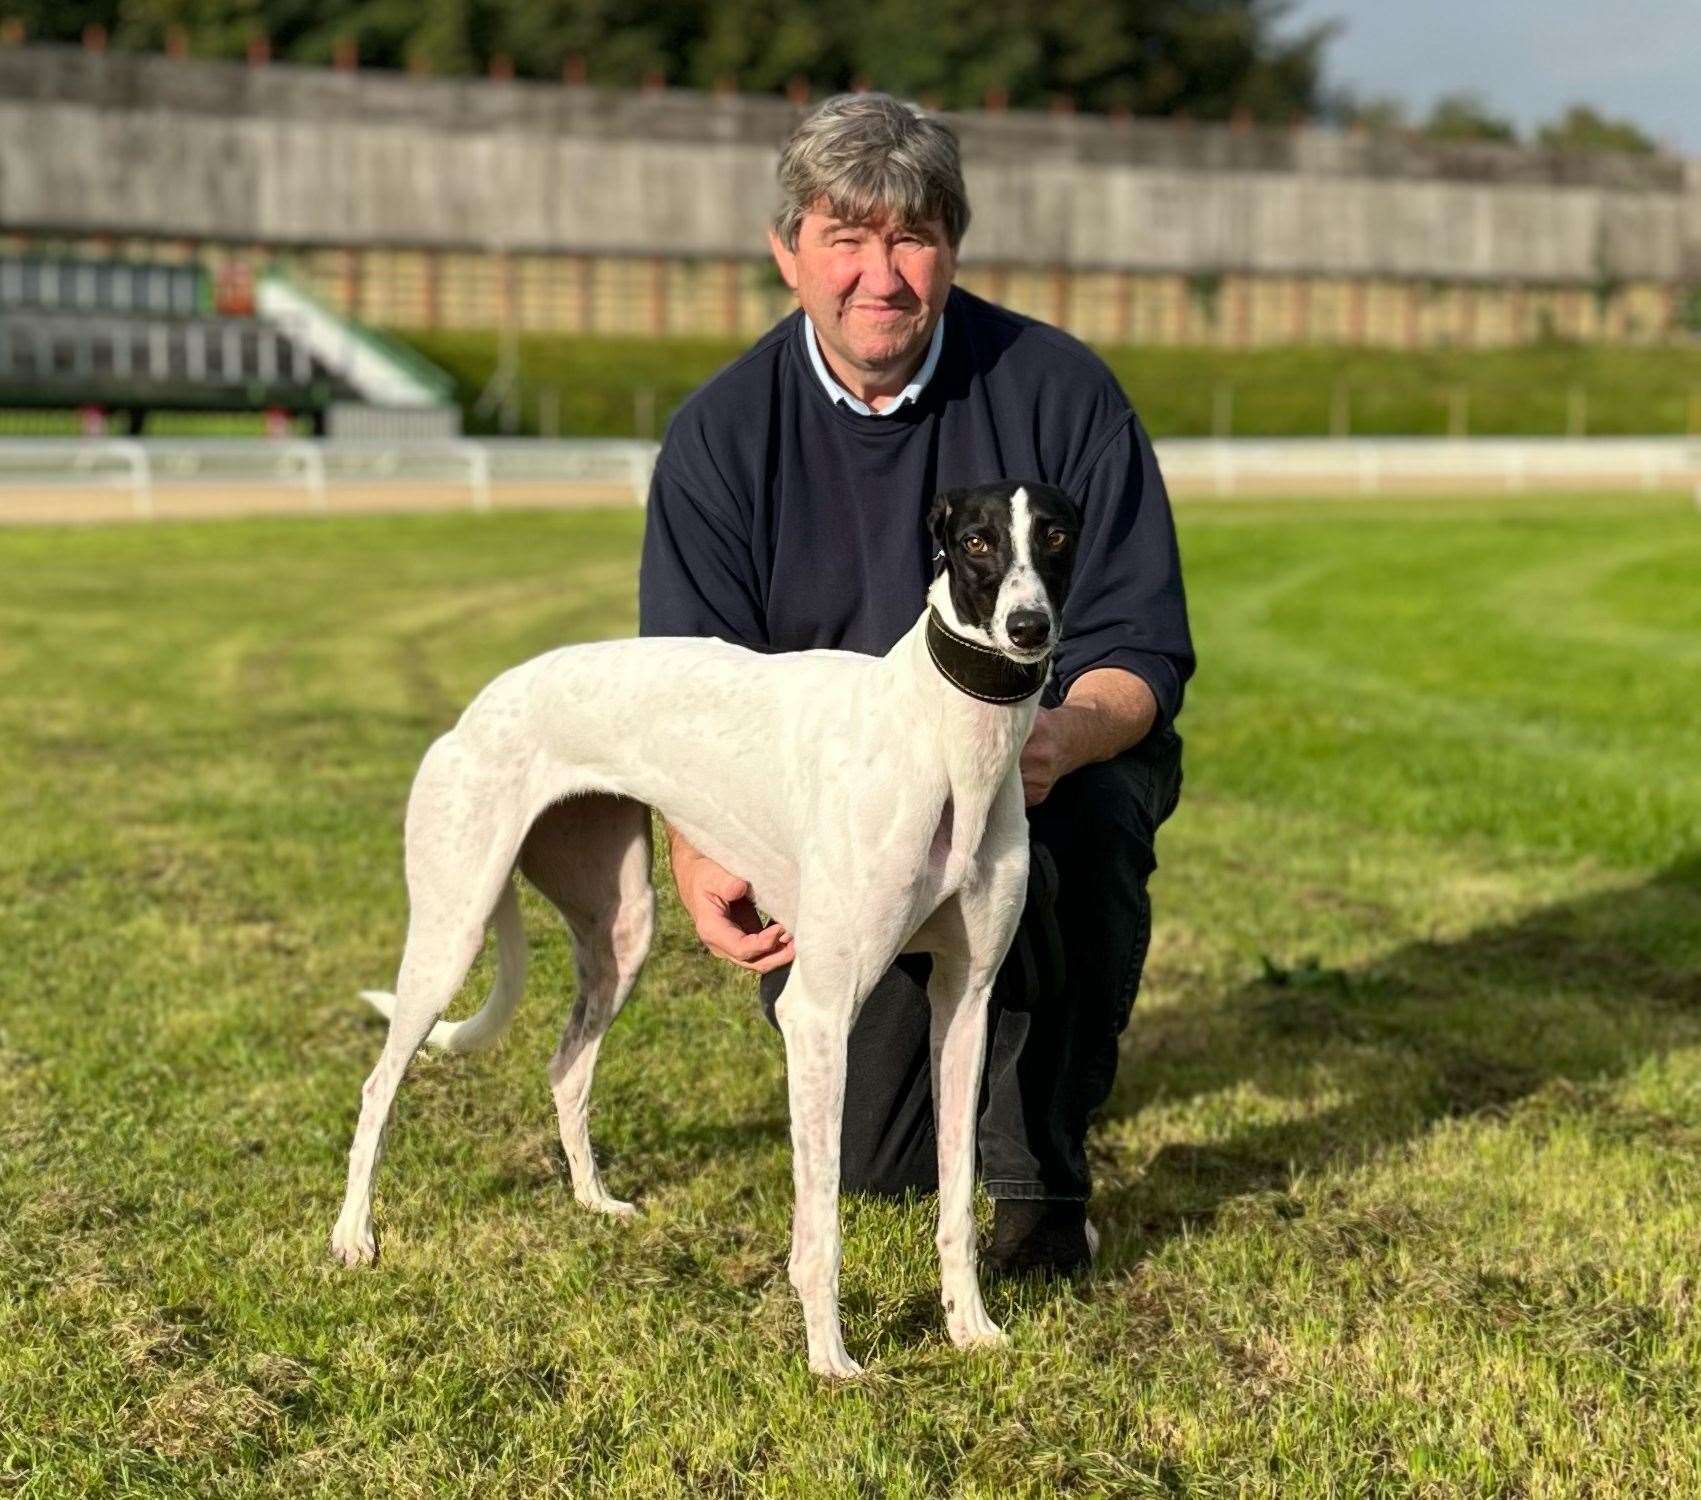 Harvel-based trainer Tony Collett has one more chance to reach next weekend’s Premier Greyhound Racing Kent Derby Final